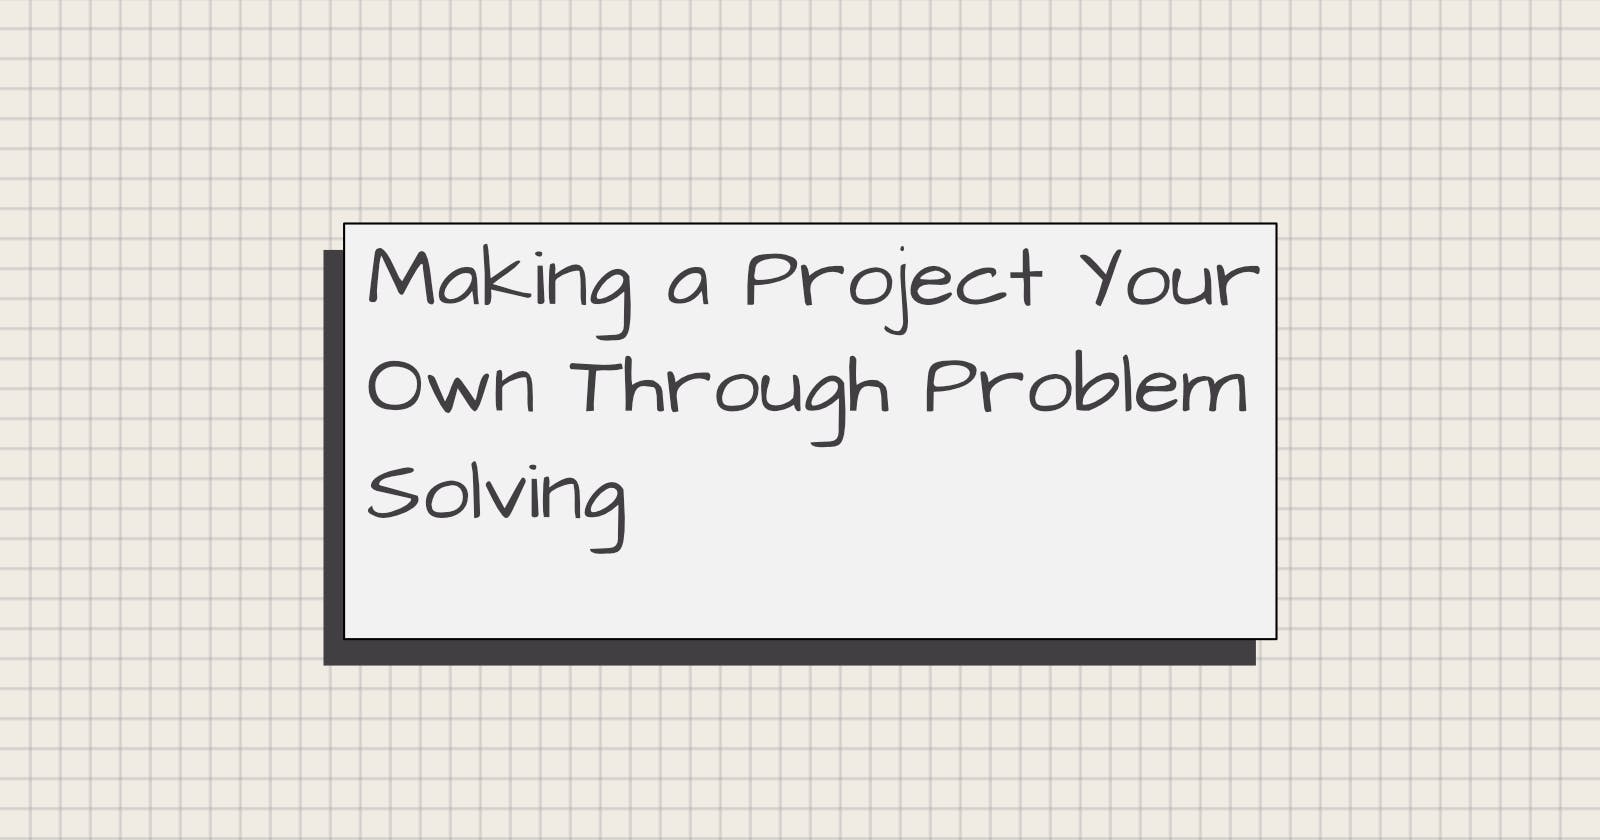 Making a Project Your Own Through Problem Solving